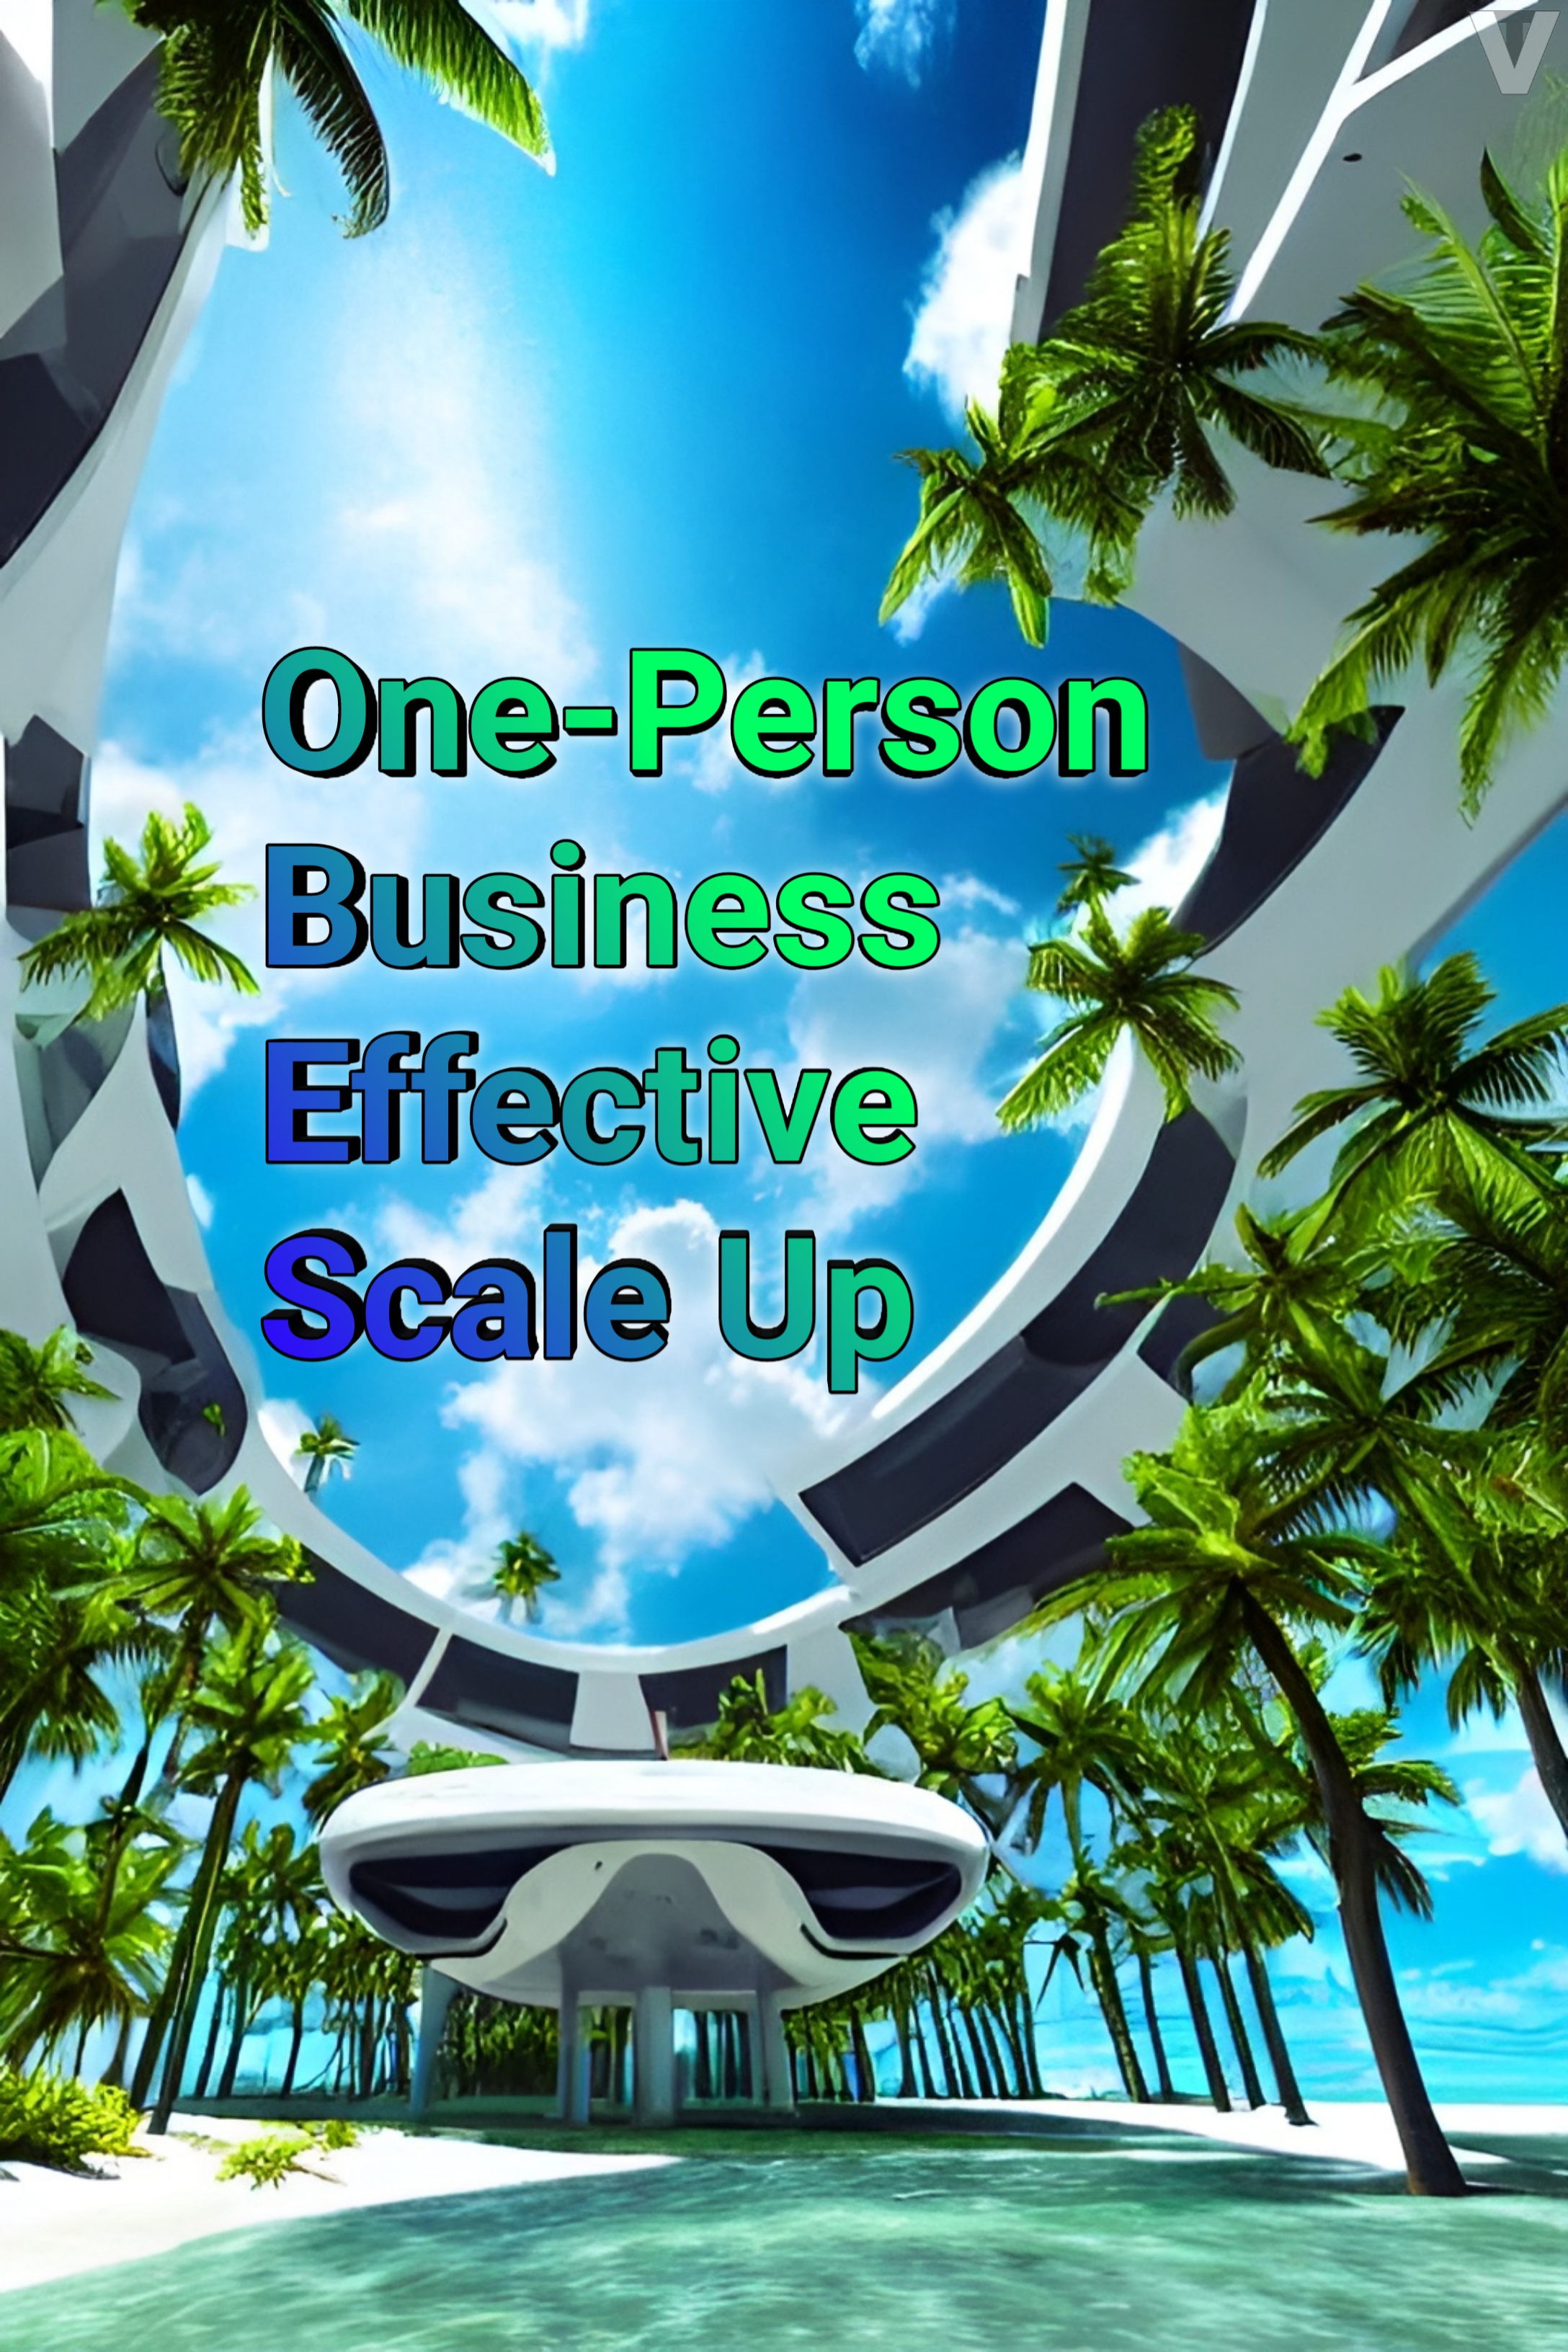 Scale Up Your One-Person Business Effectively | VitalyTennant.com 2